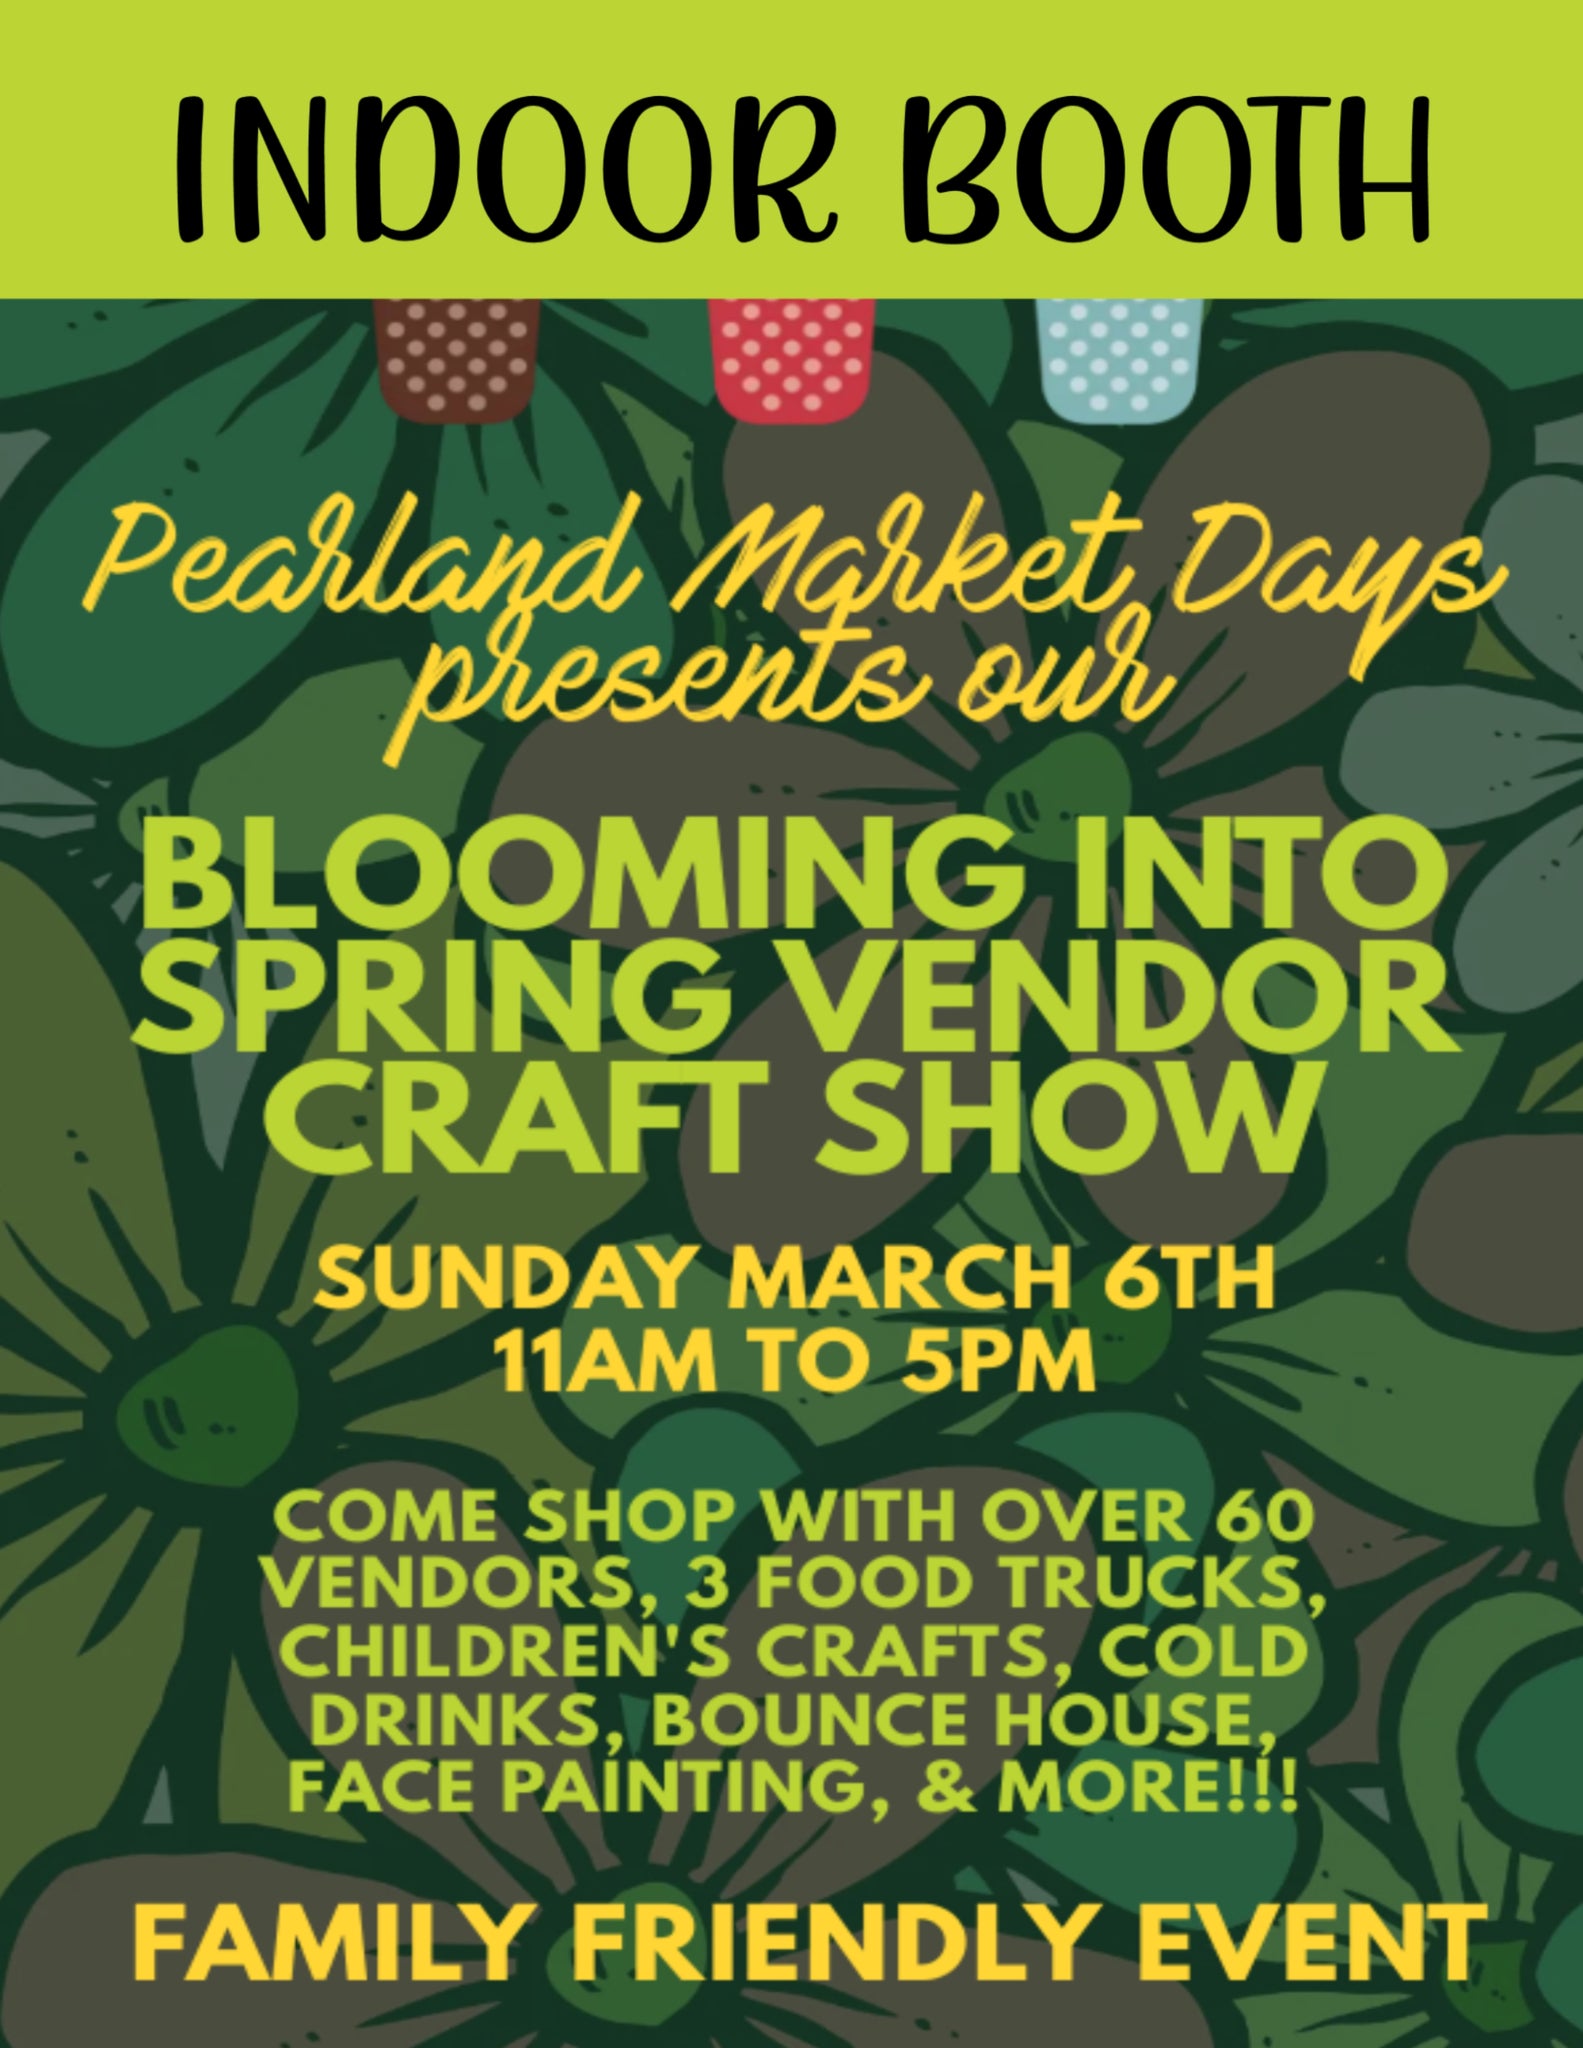 PEARLAND Sunday March 6, 2022 - INDOOR BOOTH